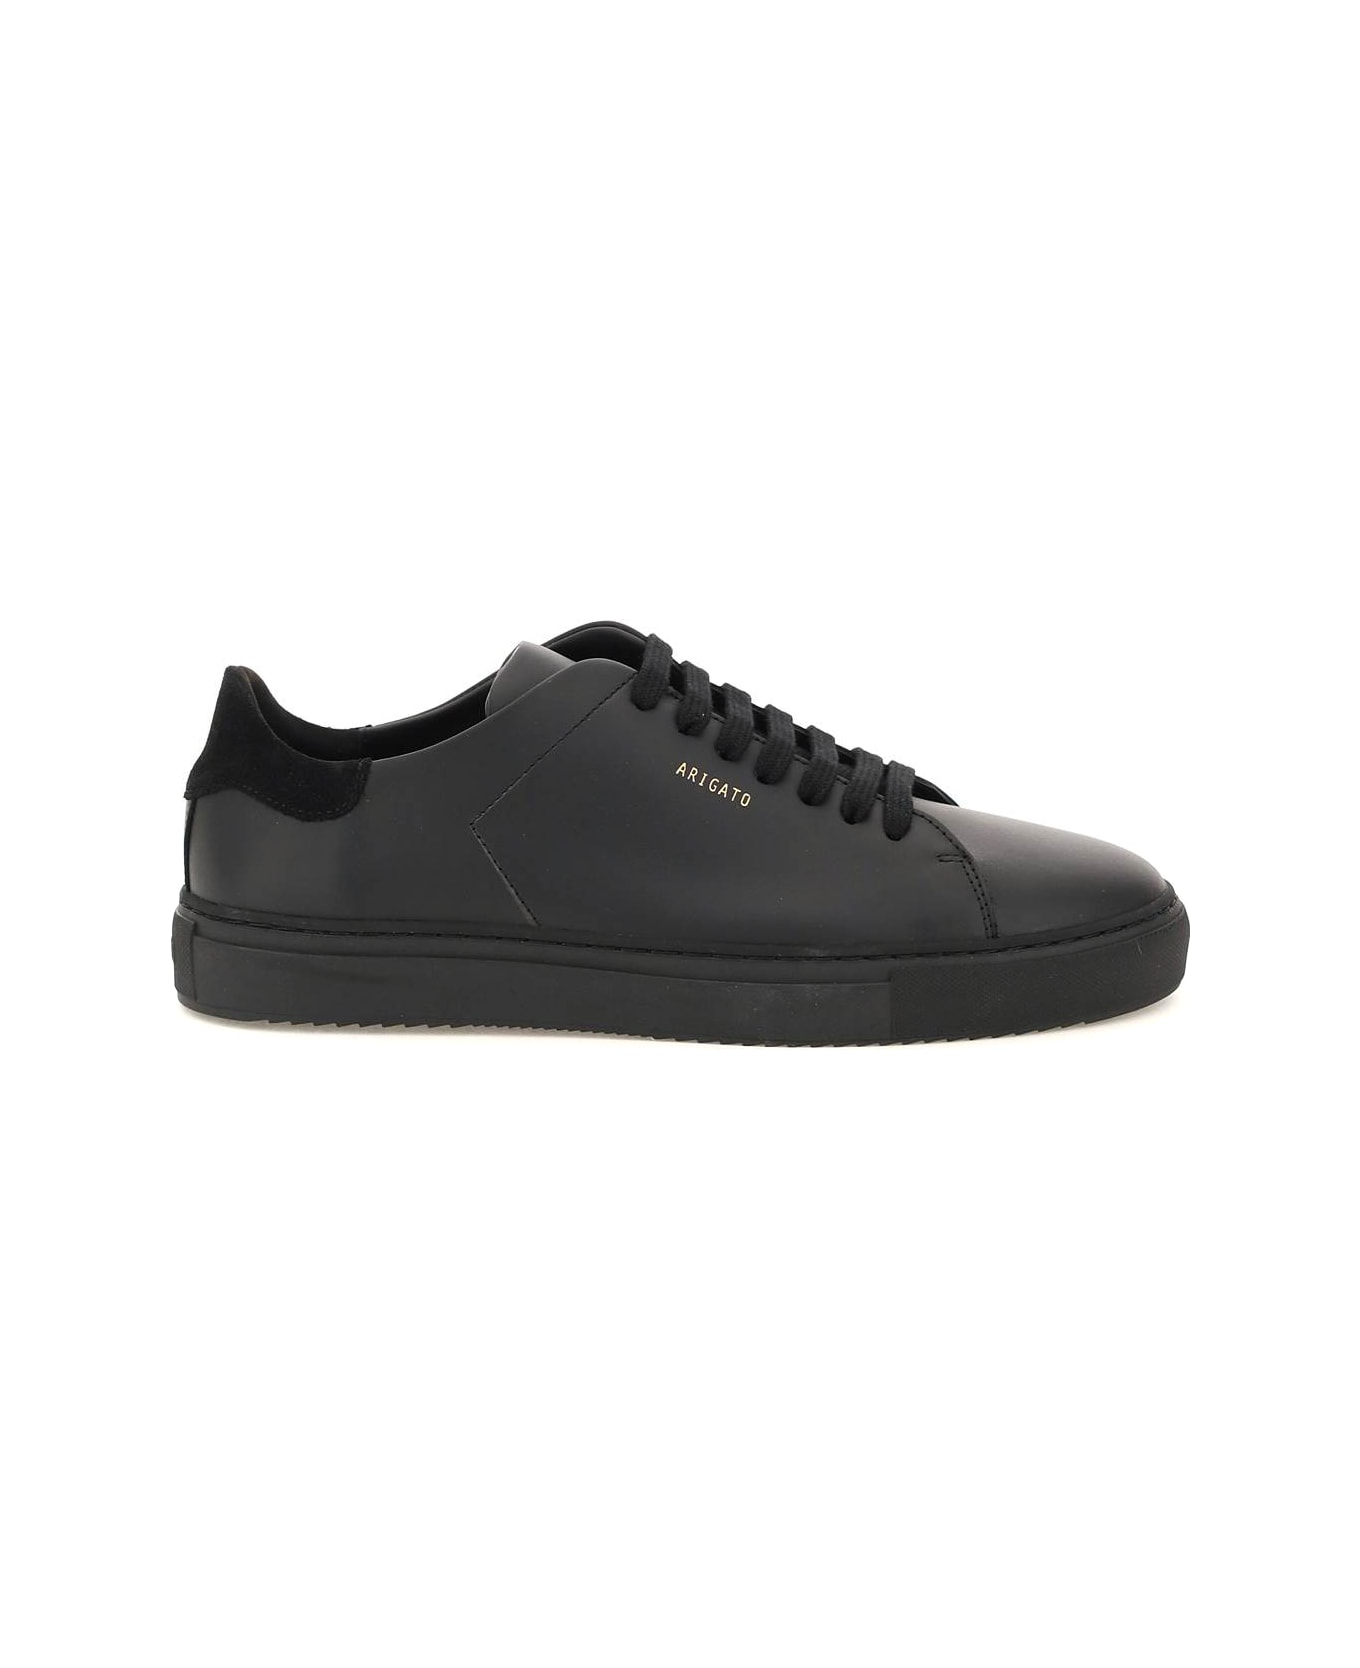 Axel Arigato Clean 90 Leather Sneakers - Nero スニーカー